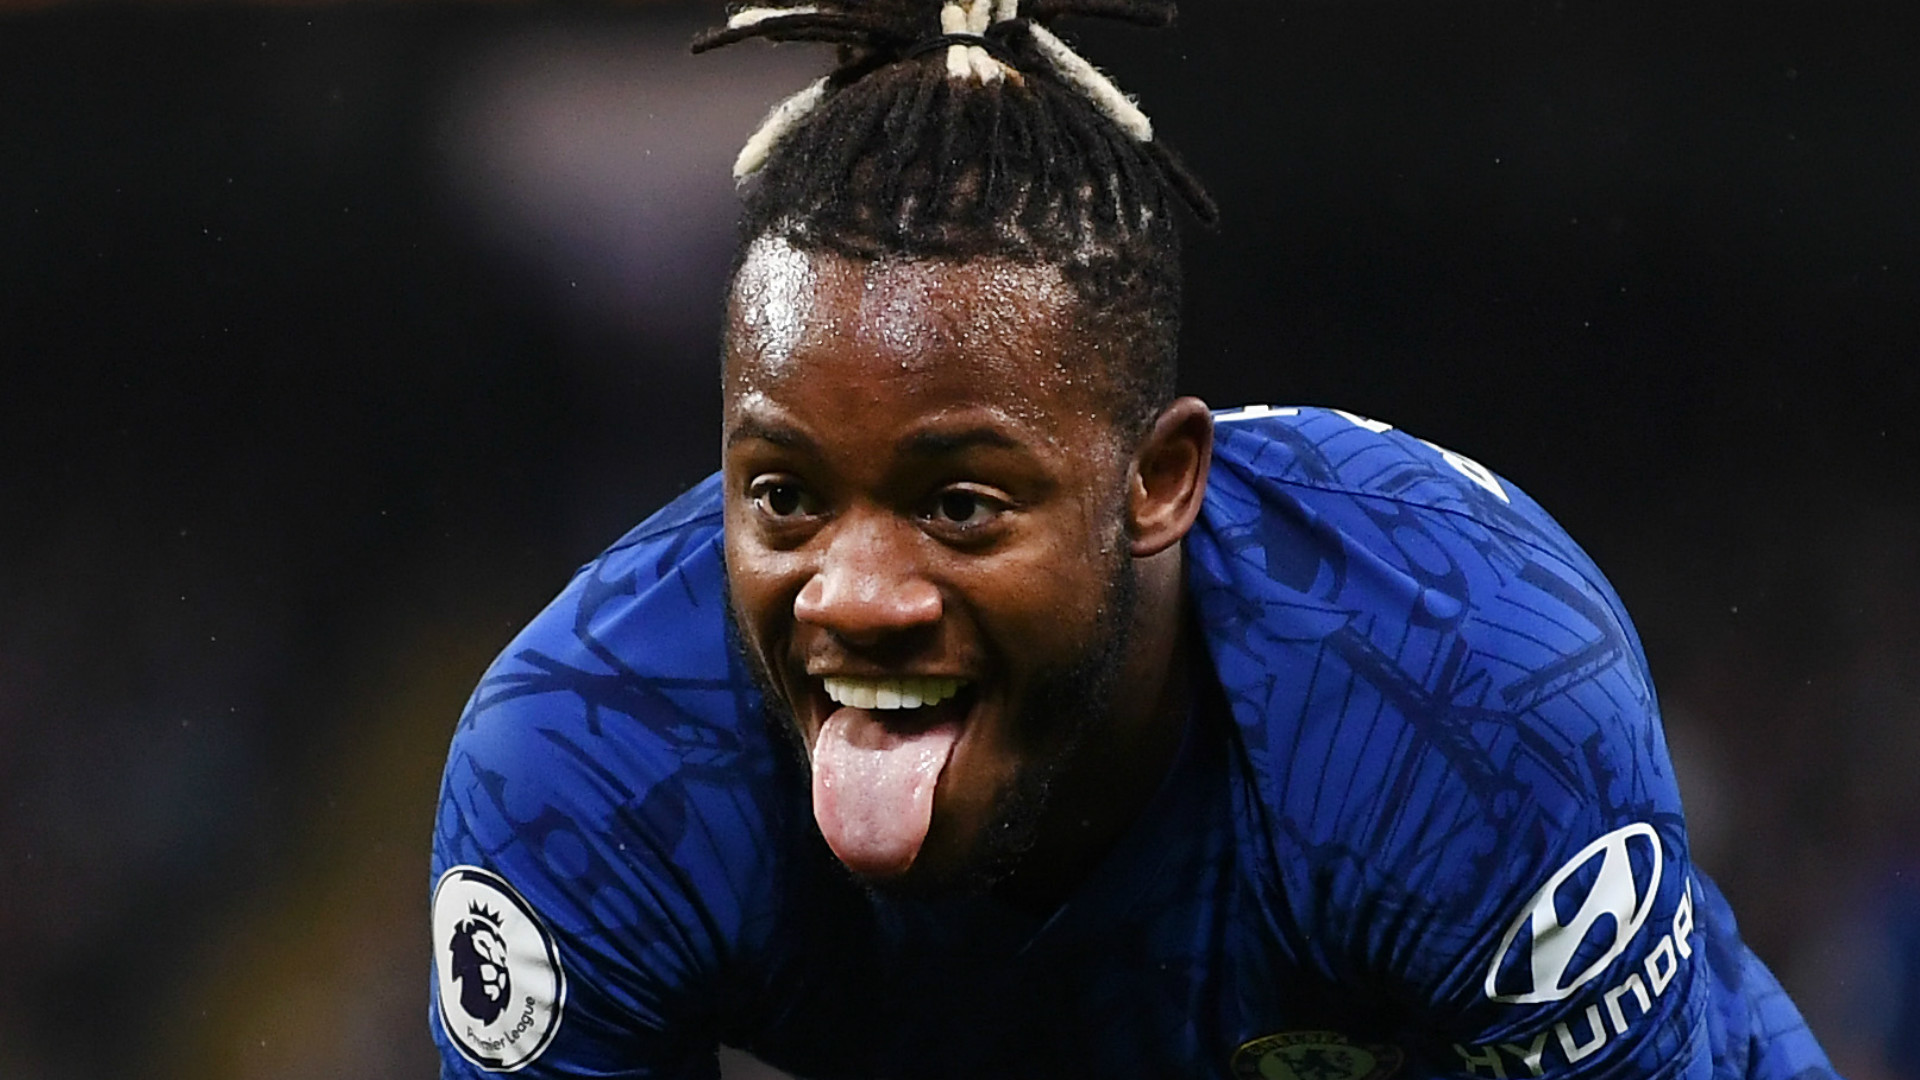 Batshuayi set to renew Chelsea contract and agree season-long loan move to Crystal Palace but Gallagher loan collapses